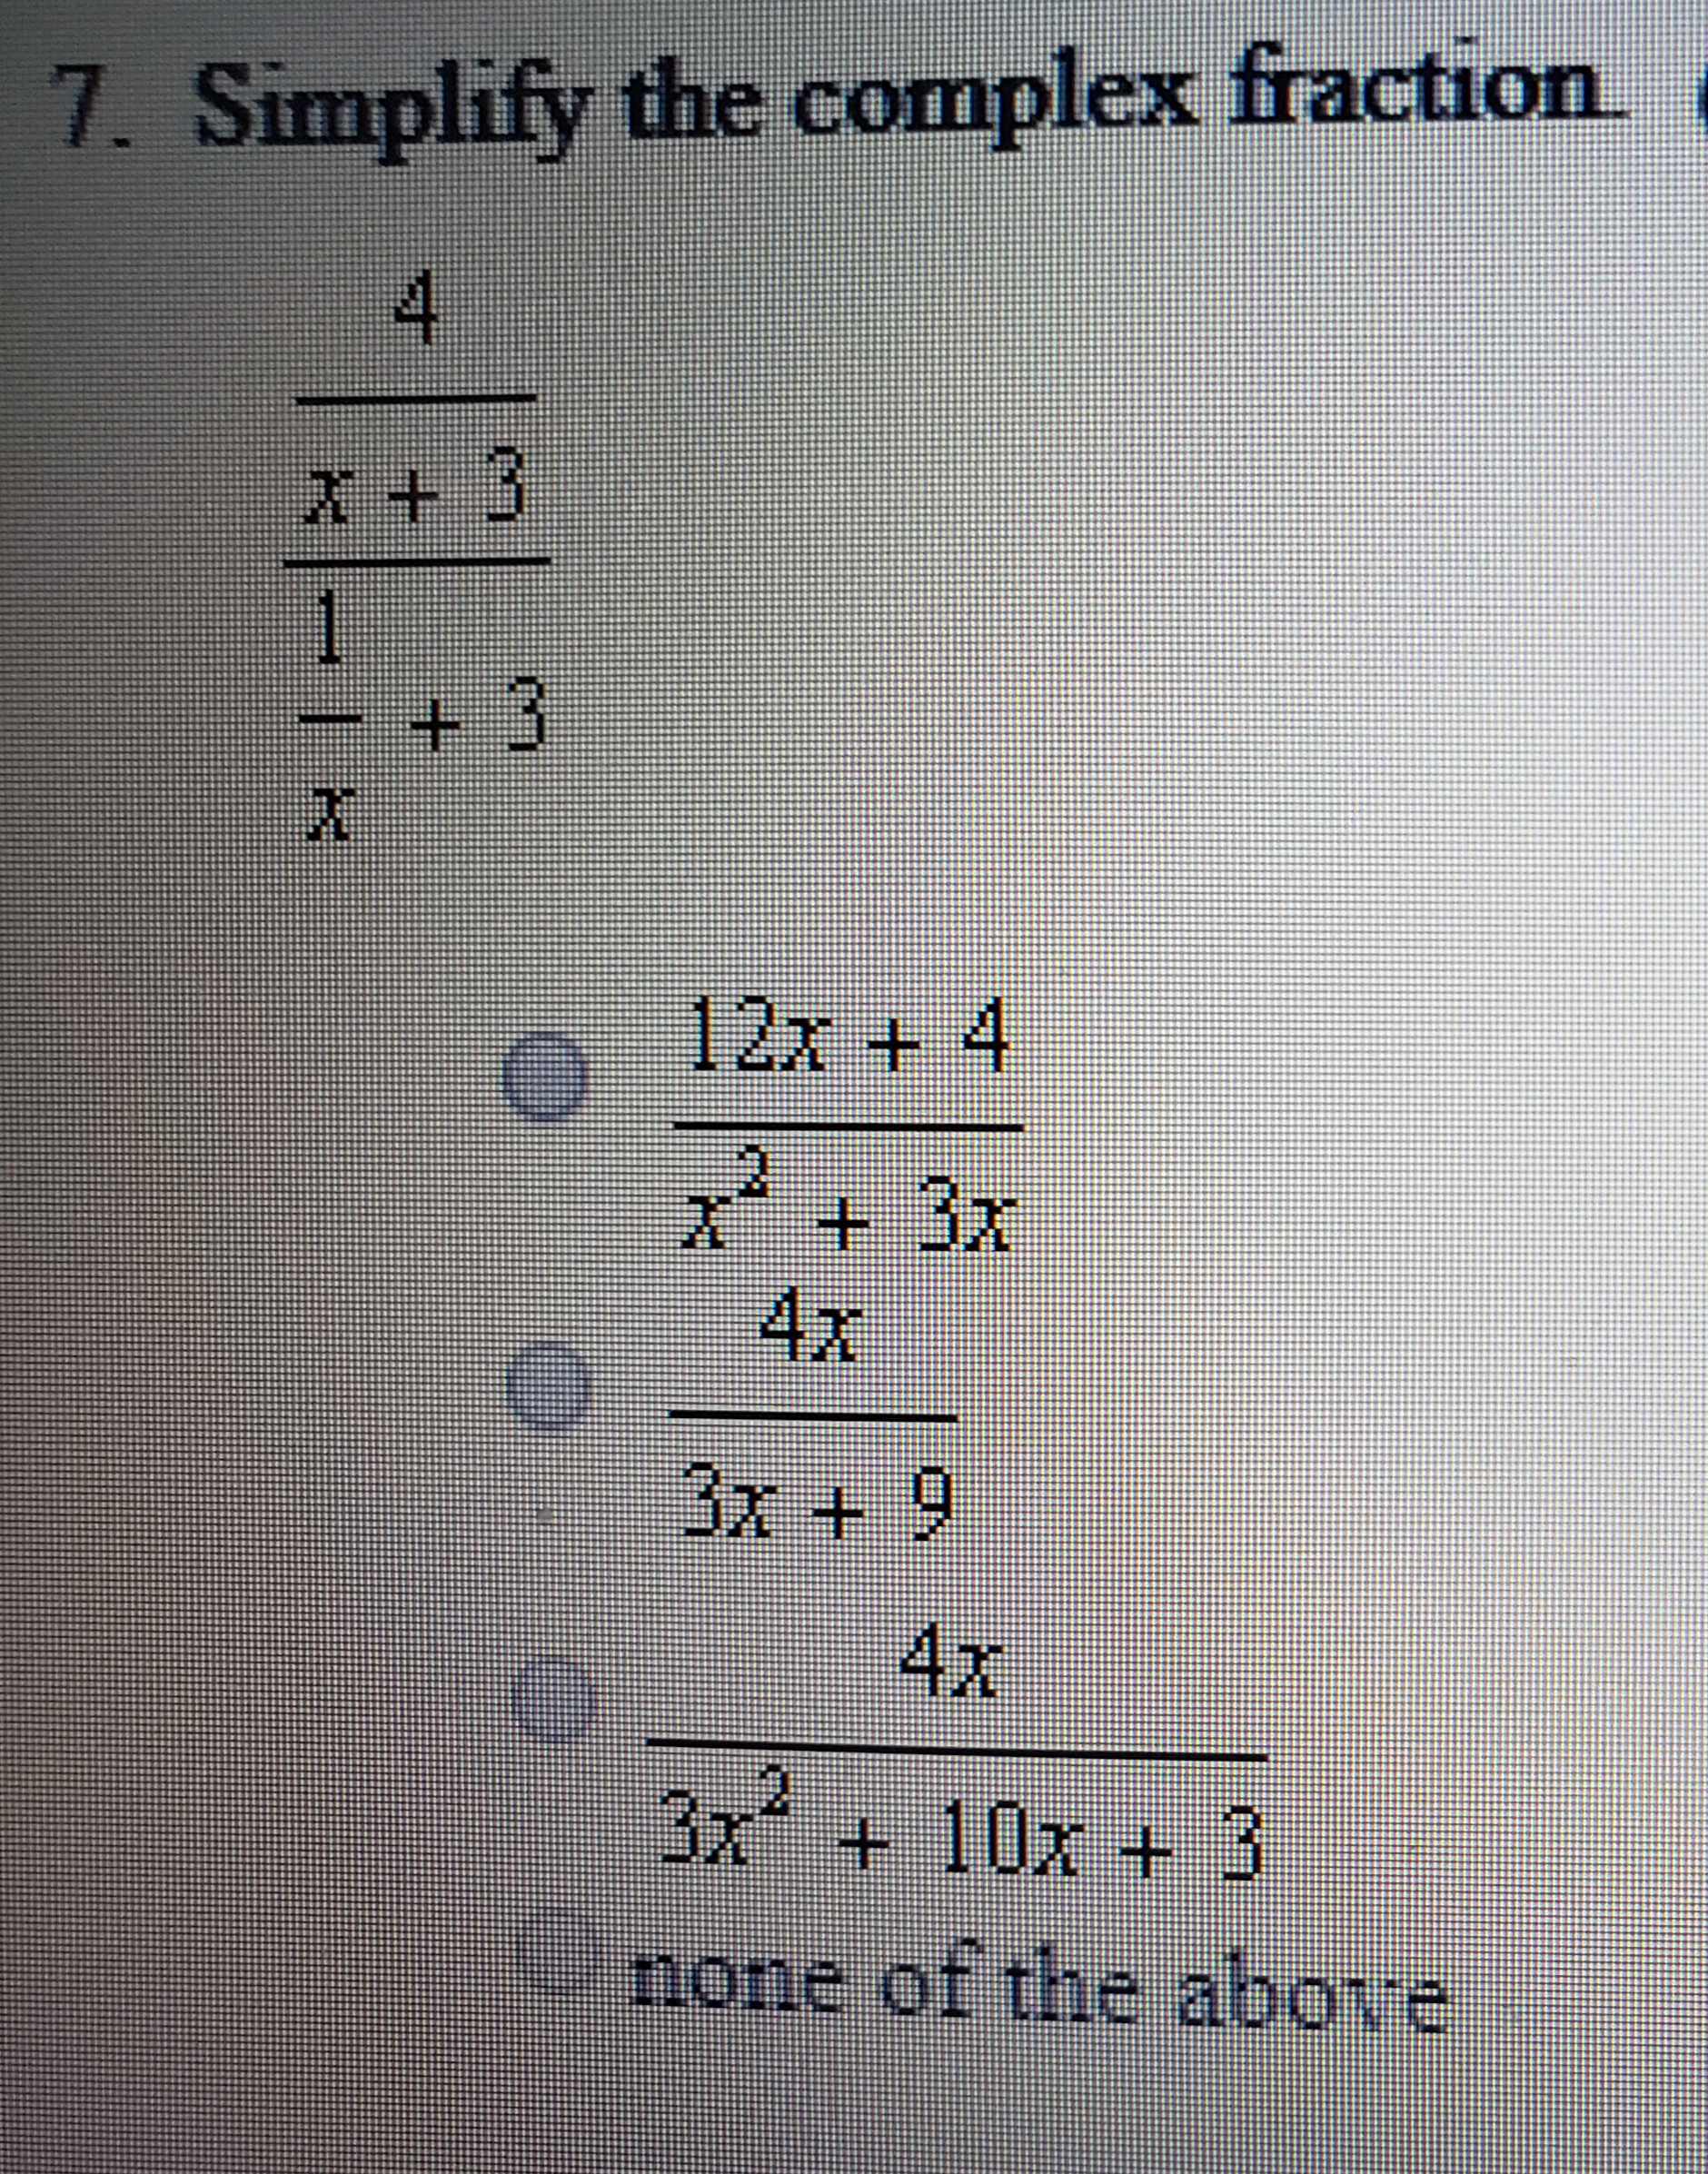 Simplify the complex fraction
4.
X + 3
